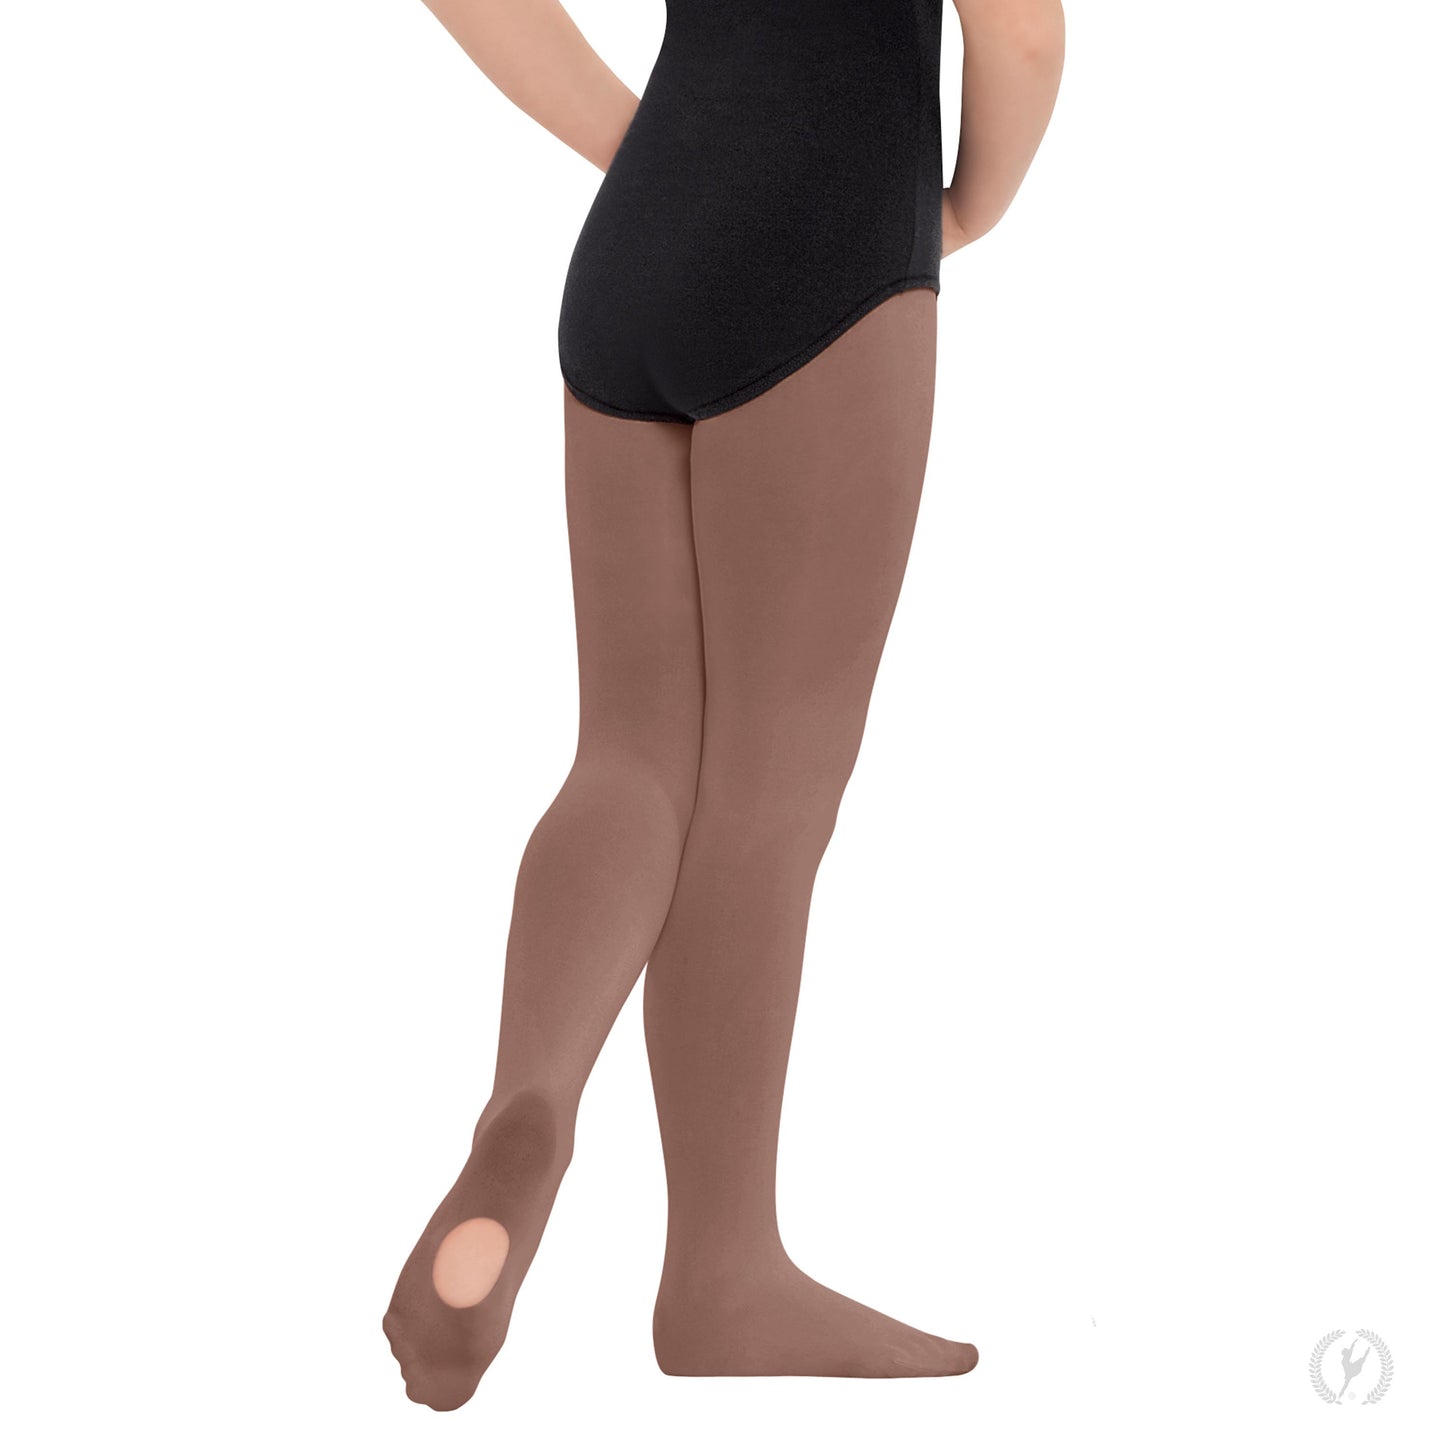 Eurotard 210c Non-Run Convertible Tights in Mocha sold by Dance Fashions Superstore in Roswell, Georgia. Dance Tights in Mocha for Girls.